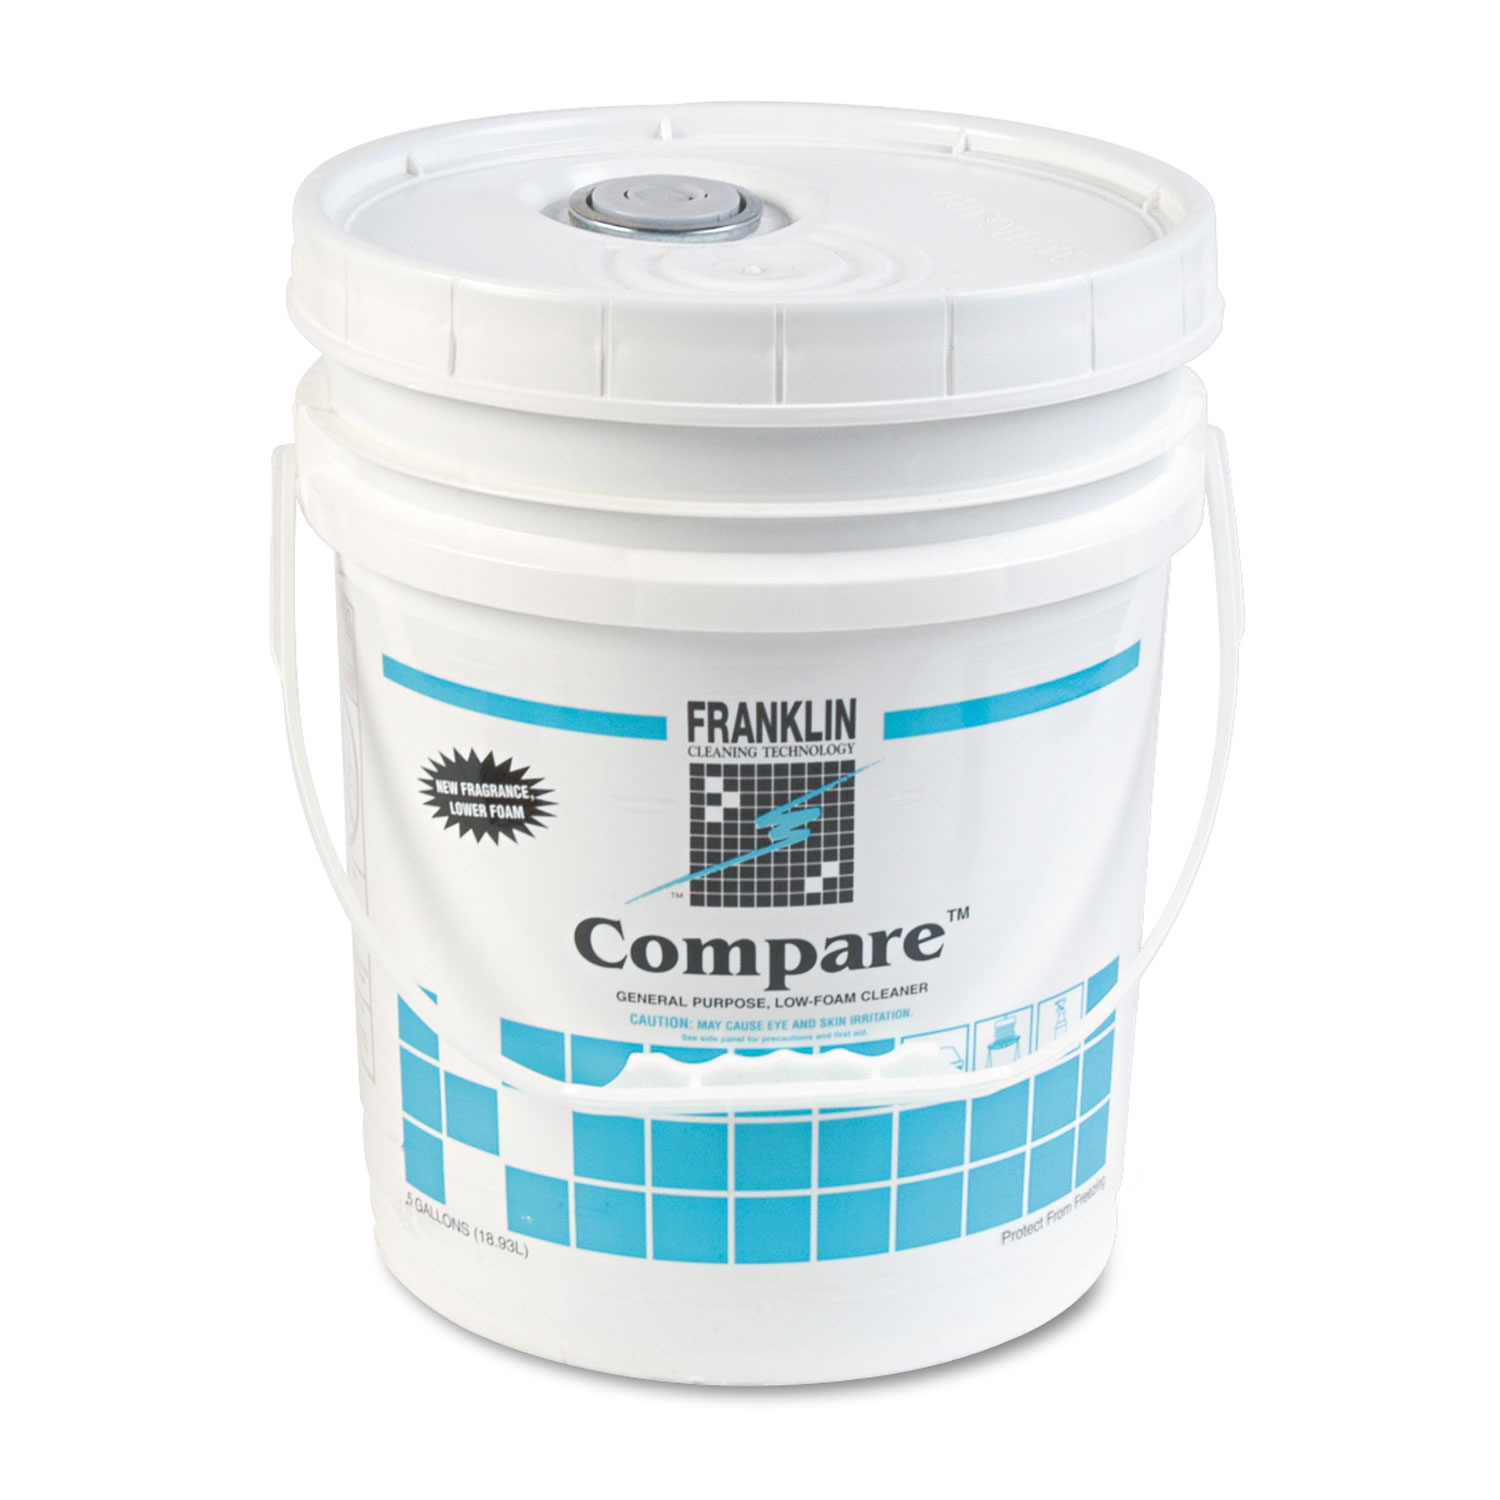  Franklin Cleaning Technology F216026 Compare Floor Cleaner, 5gal Pail (FKLF216026) 